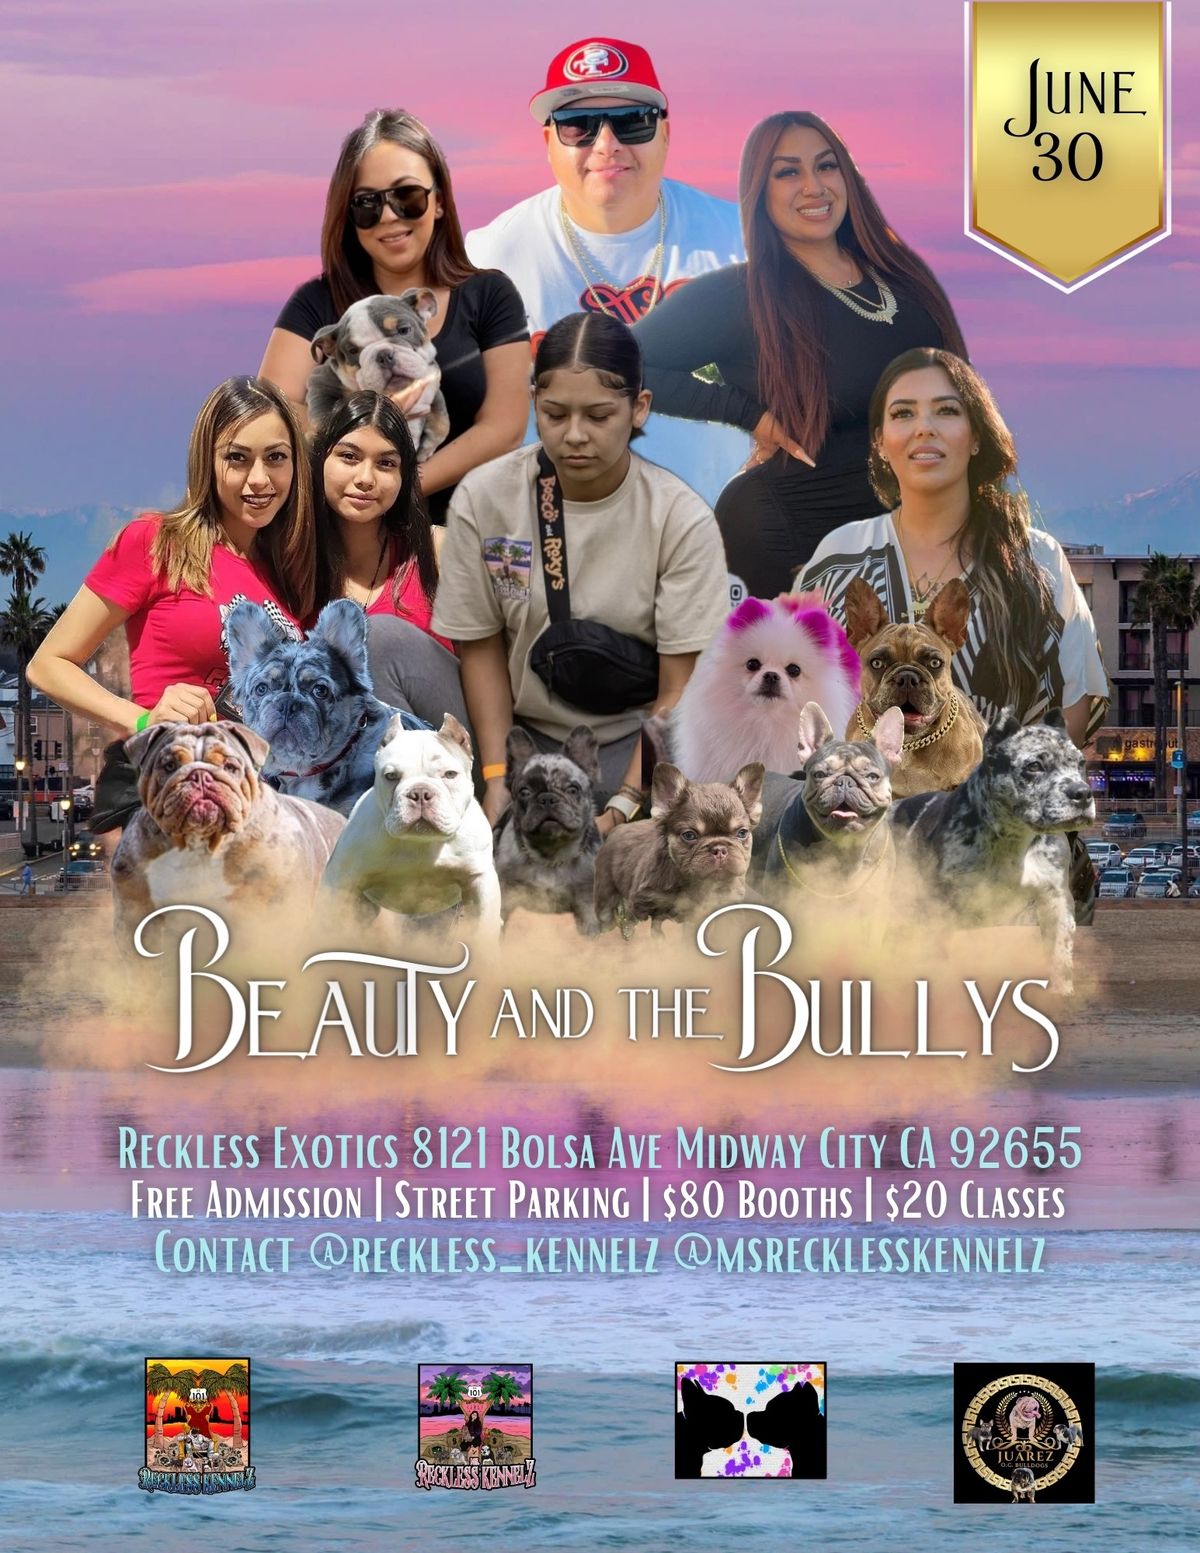 Beauty and the Bullys \ud83d\udc51\ud83d\udc3e